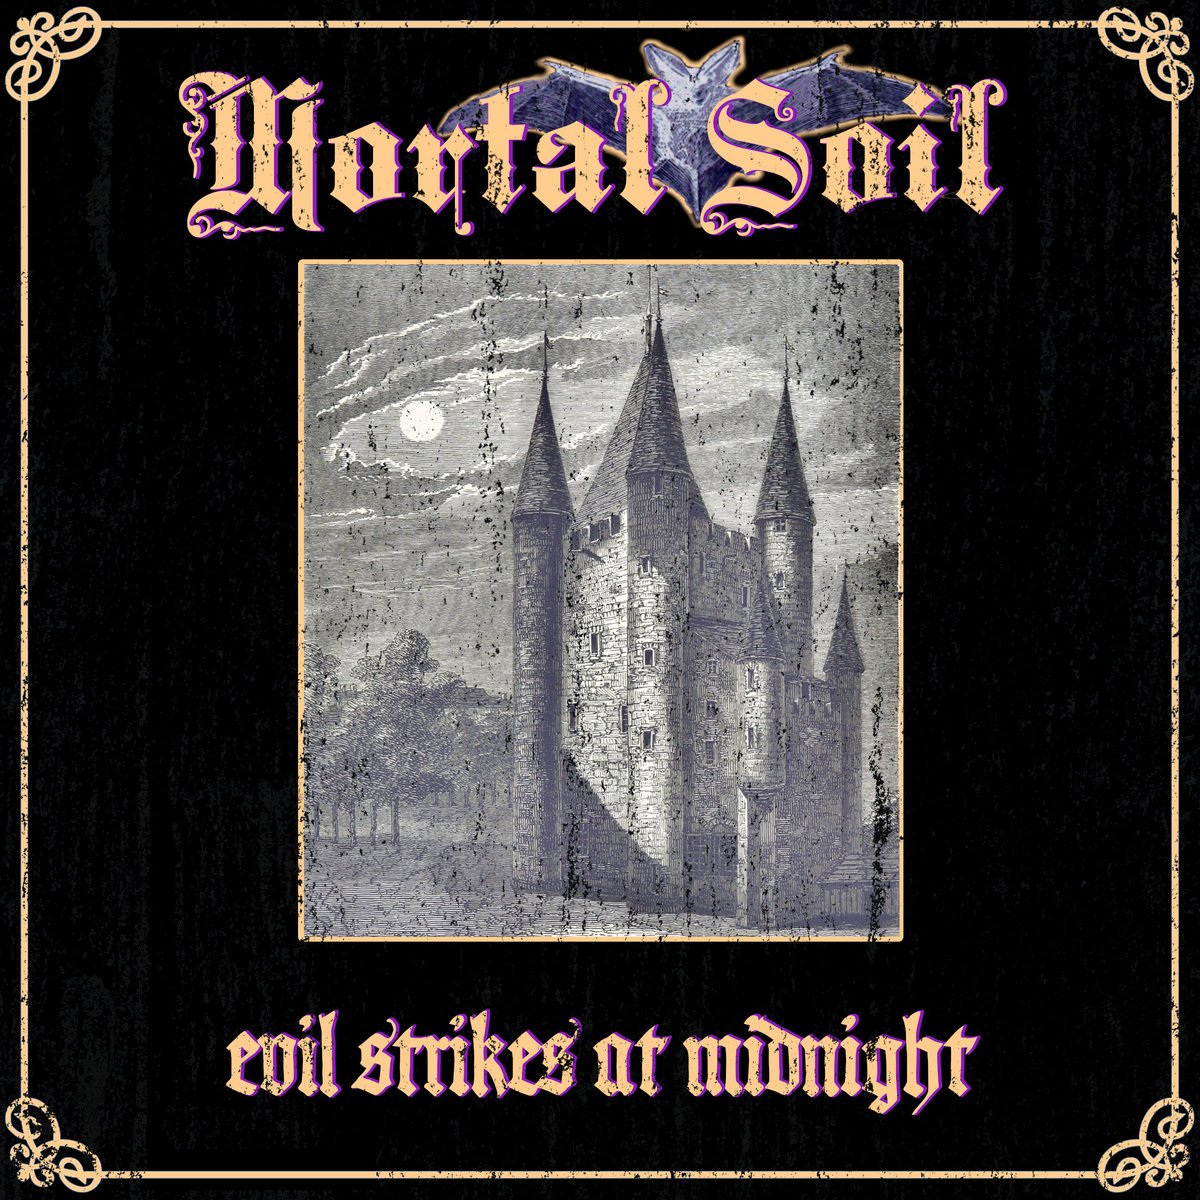 Interview with MORTAL SOIL